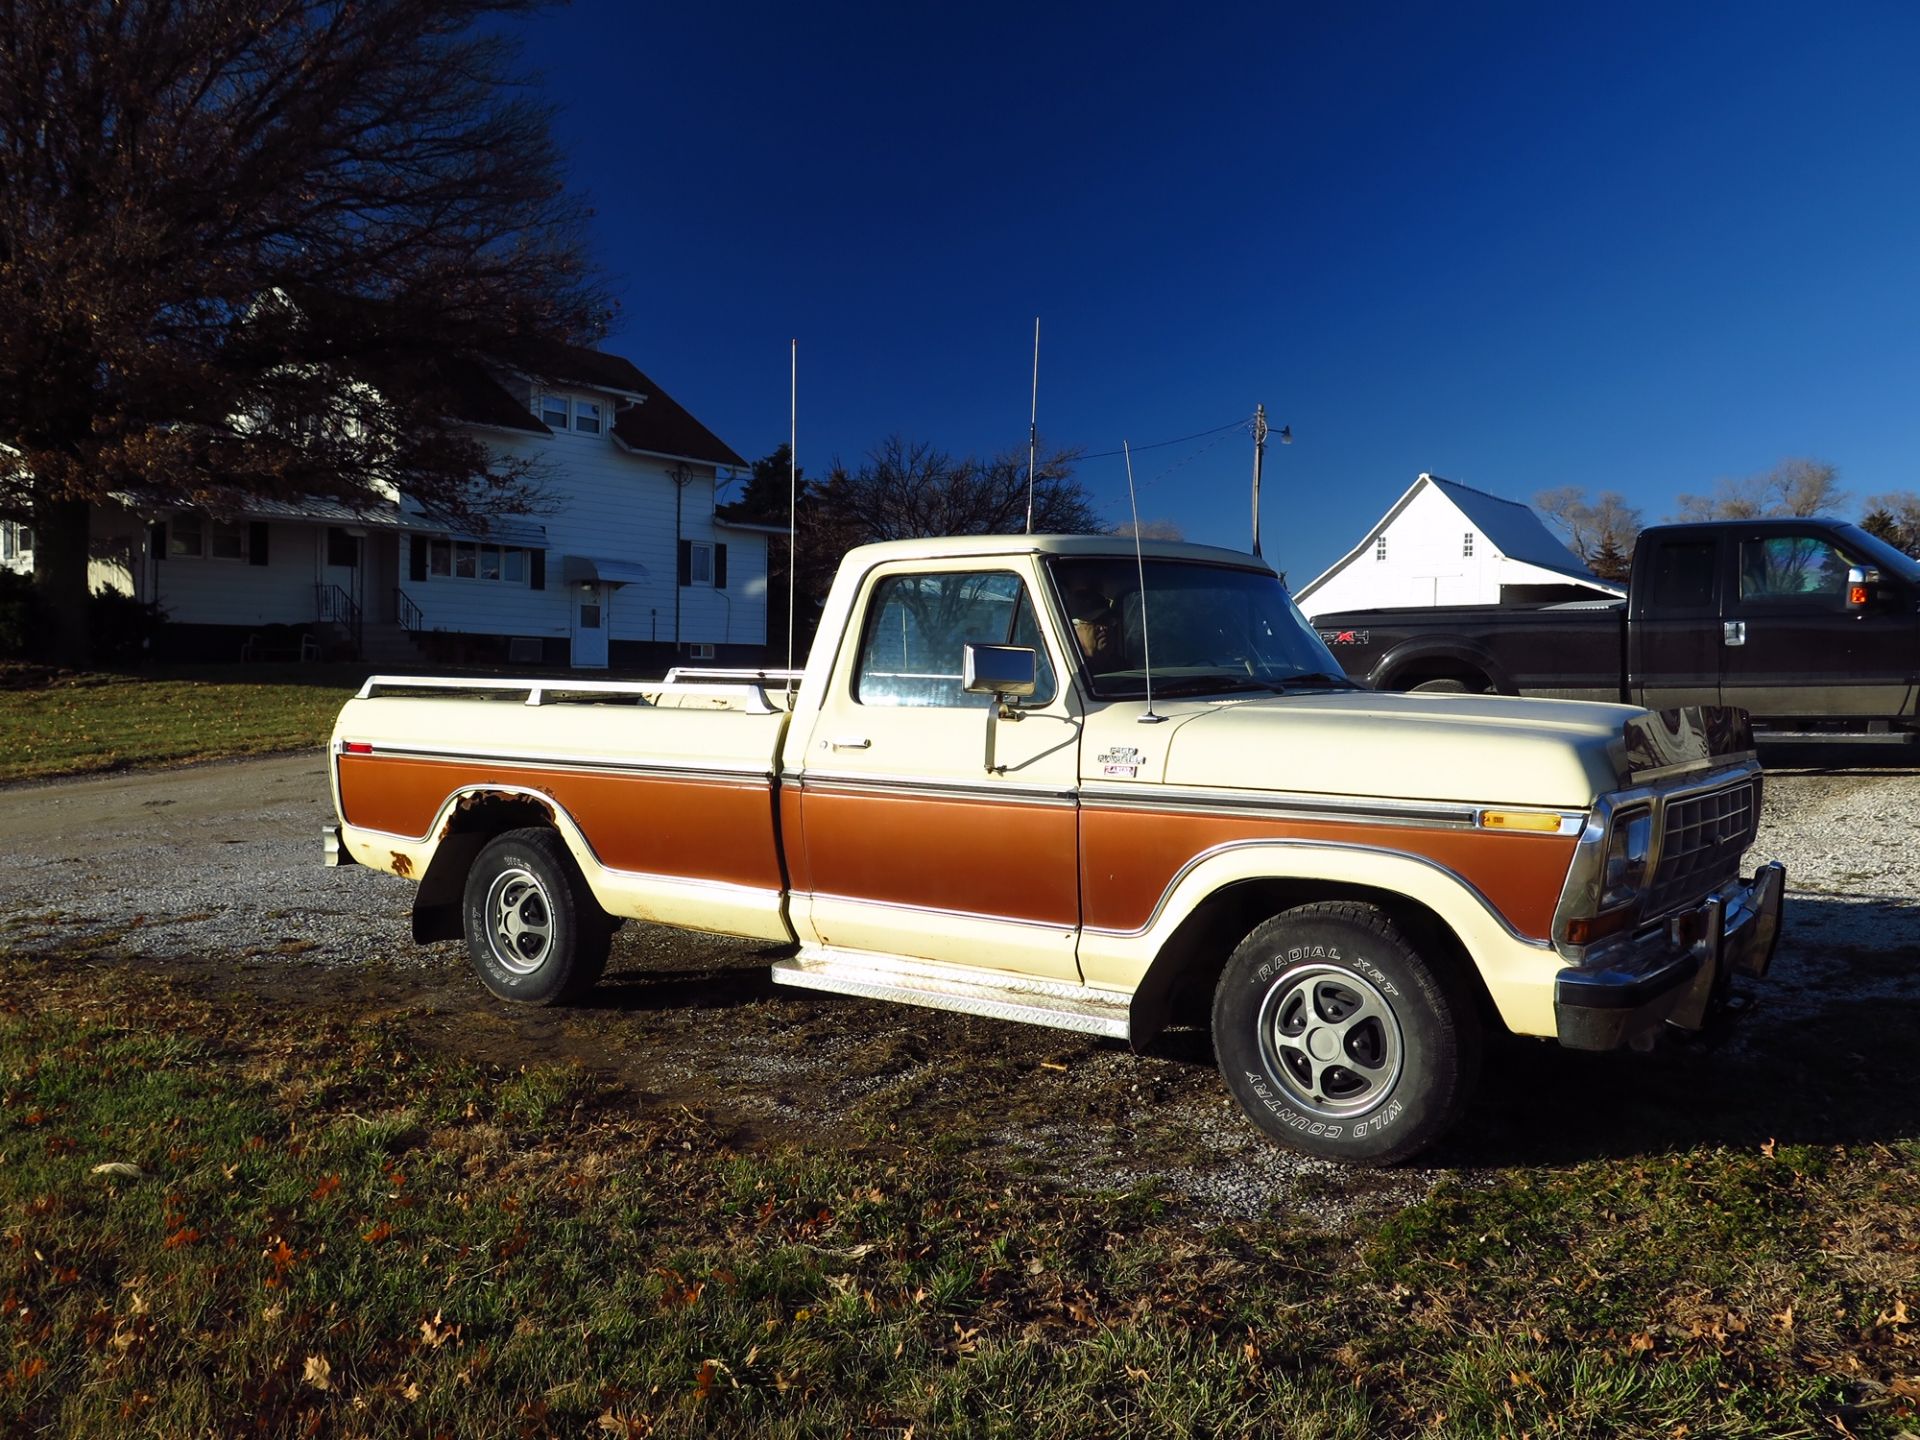 1978 Ford Lariat F-150 2wd, 400 V-8, C7Auto, Posi, AC, Air Comp, LP/Gas (one owner)